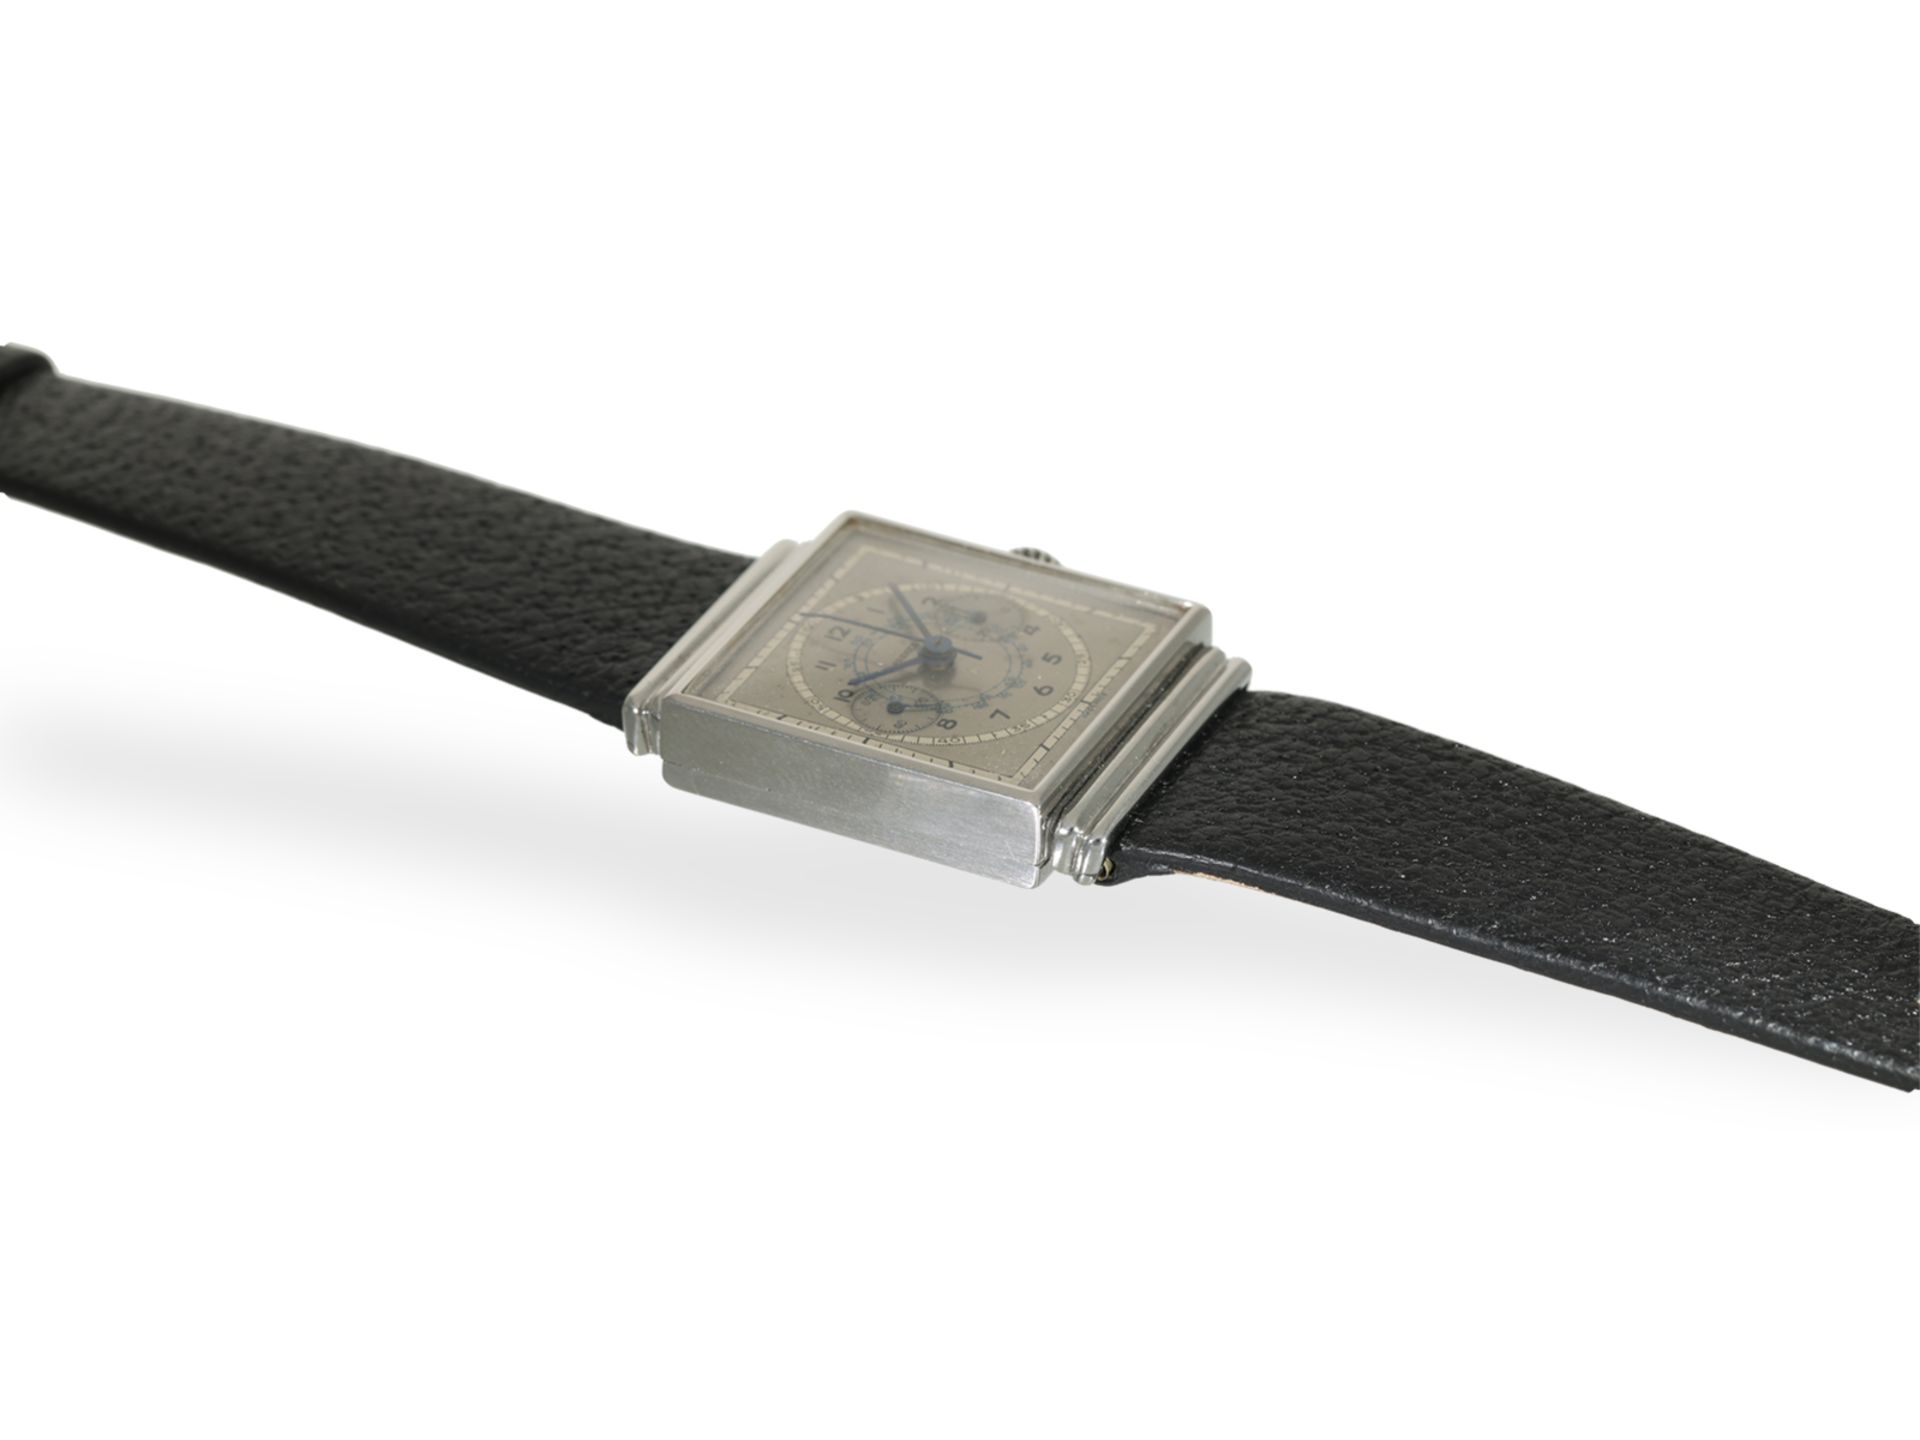 Wristwatch: very beautiful Parker Square Chronograph in steel, Val. 69, 1930s - Image 6 of 7